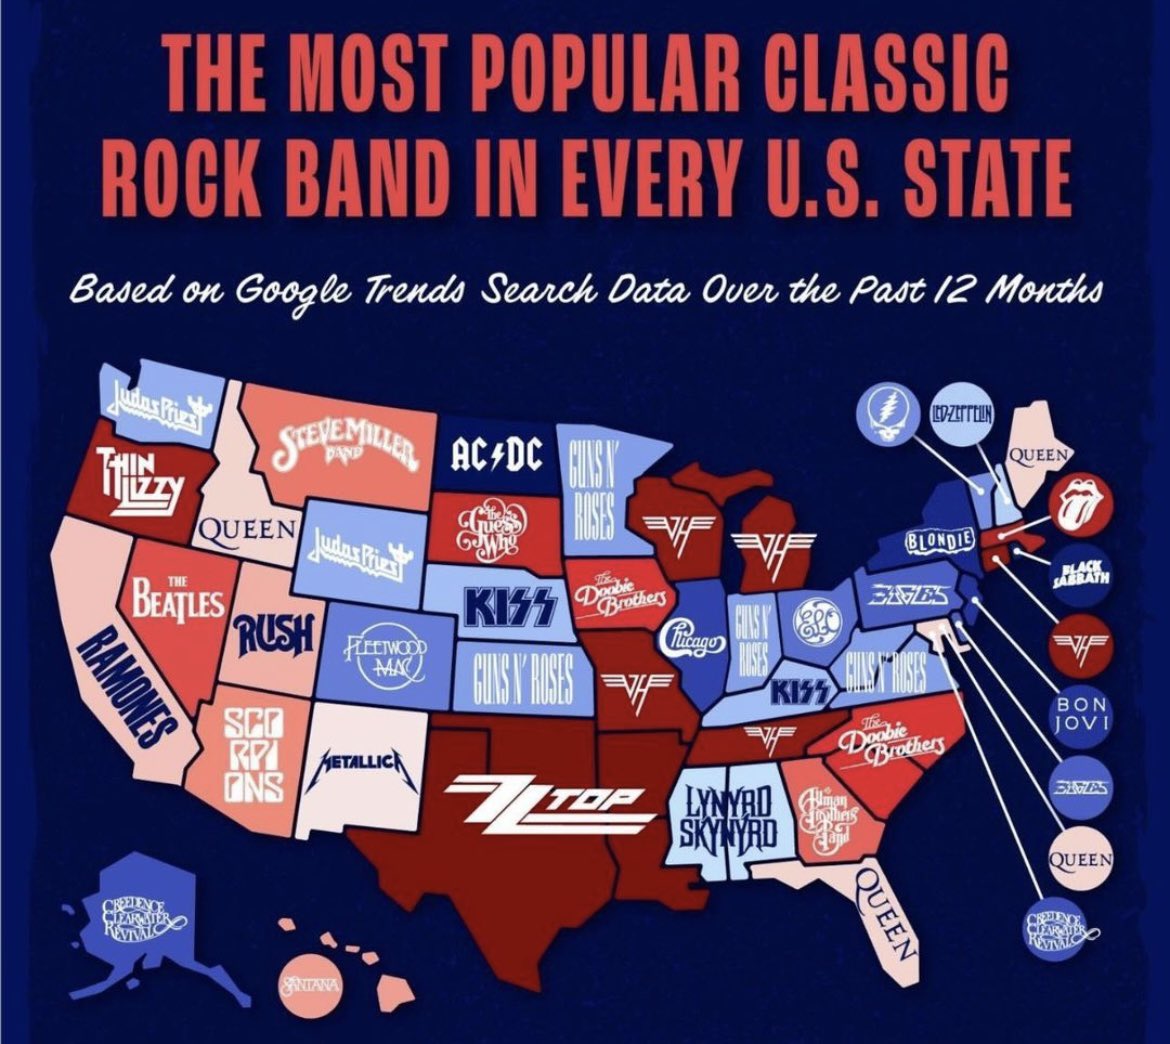 This is so cool!  What’s the most popular in your state?